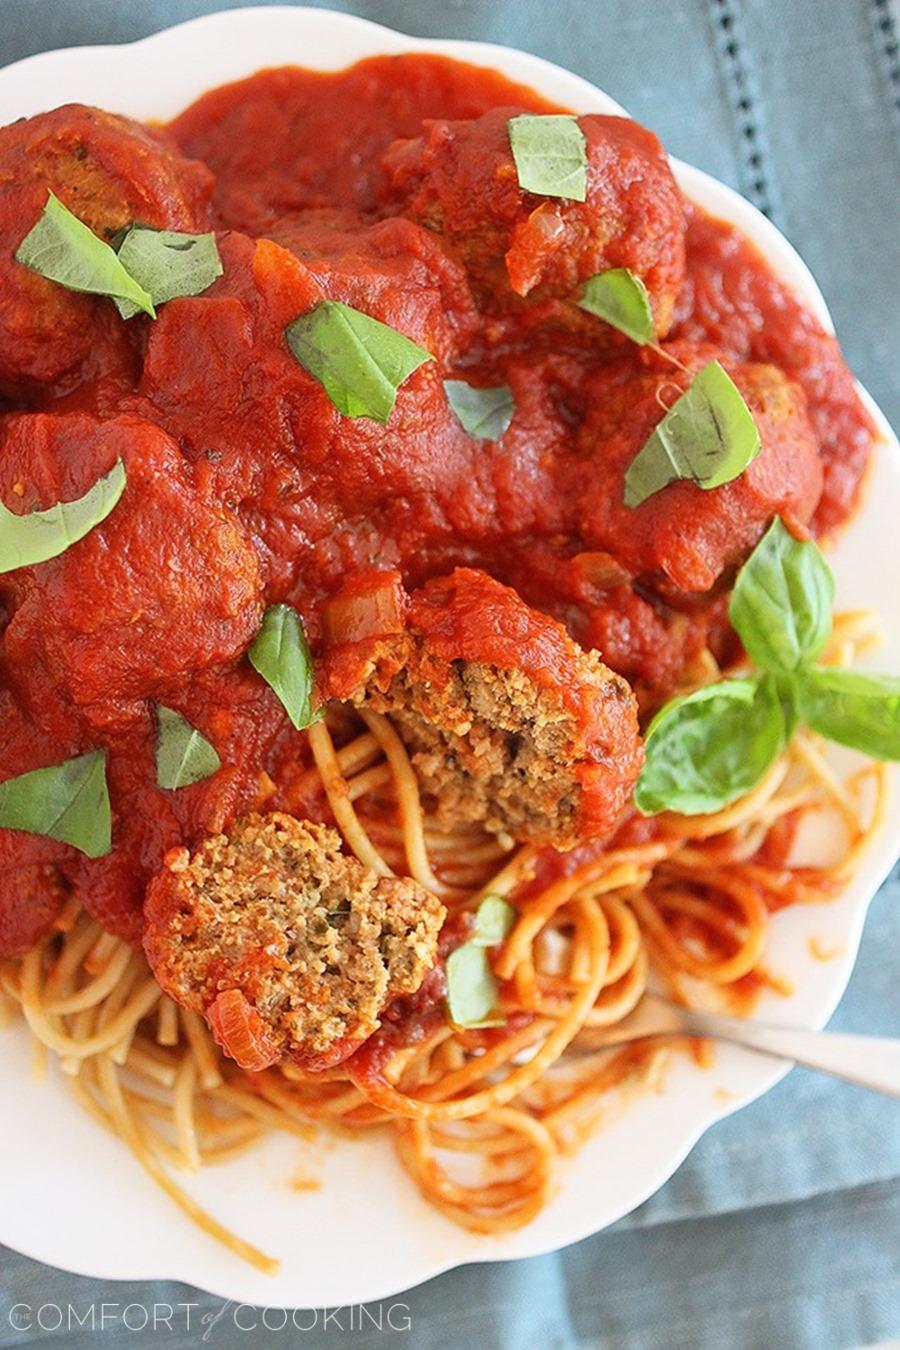 Slow Cooker Turkey Pesto Meatballs & Marinara – Dig in to these delicious turkey meatballs with fresh pesto and hearty marinara sauce! | thecomfortofcooking.com